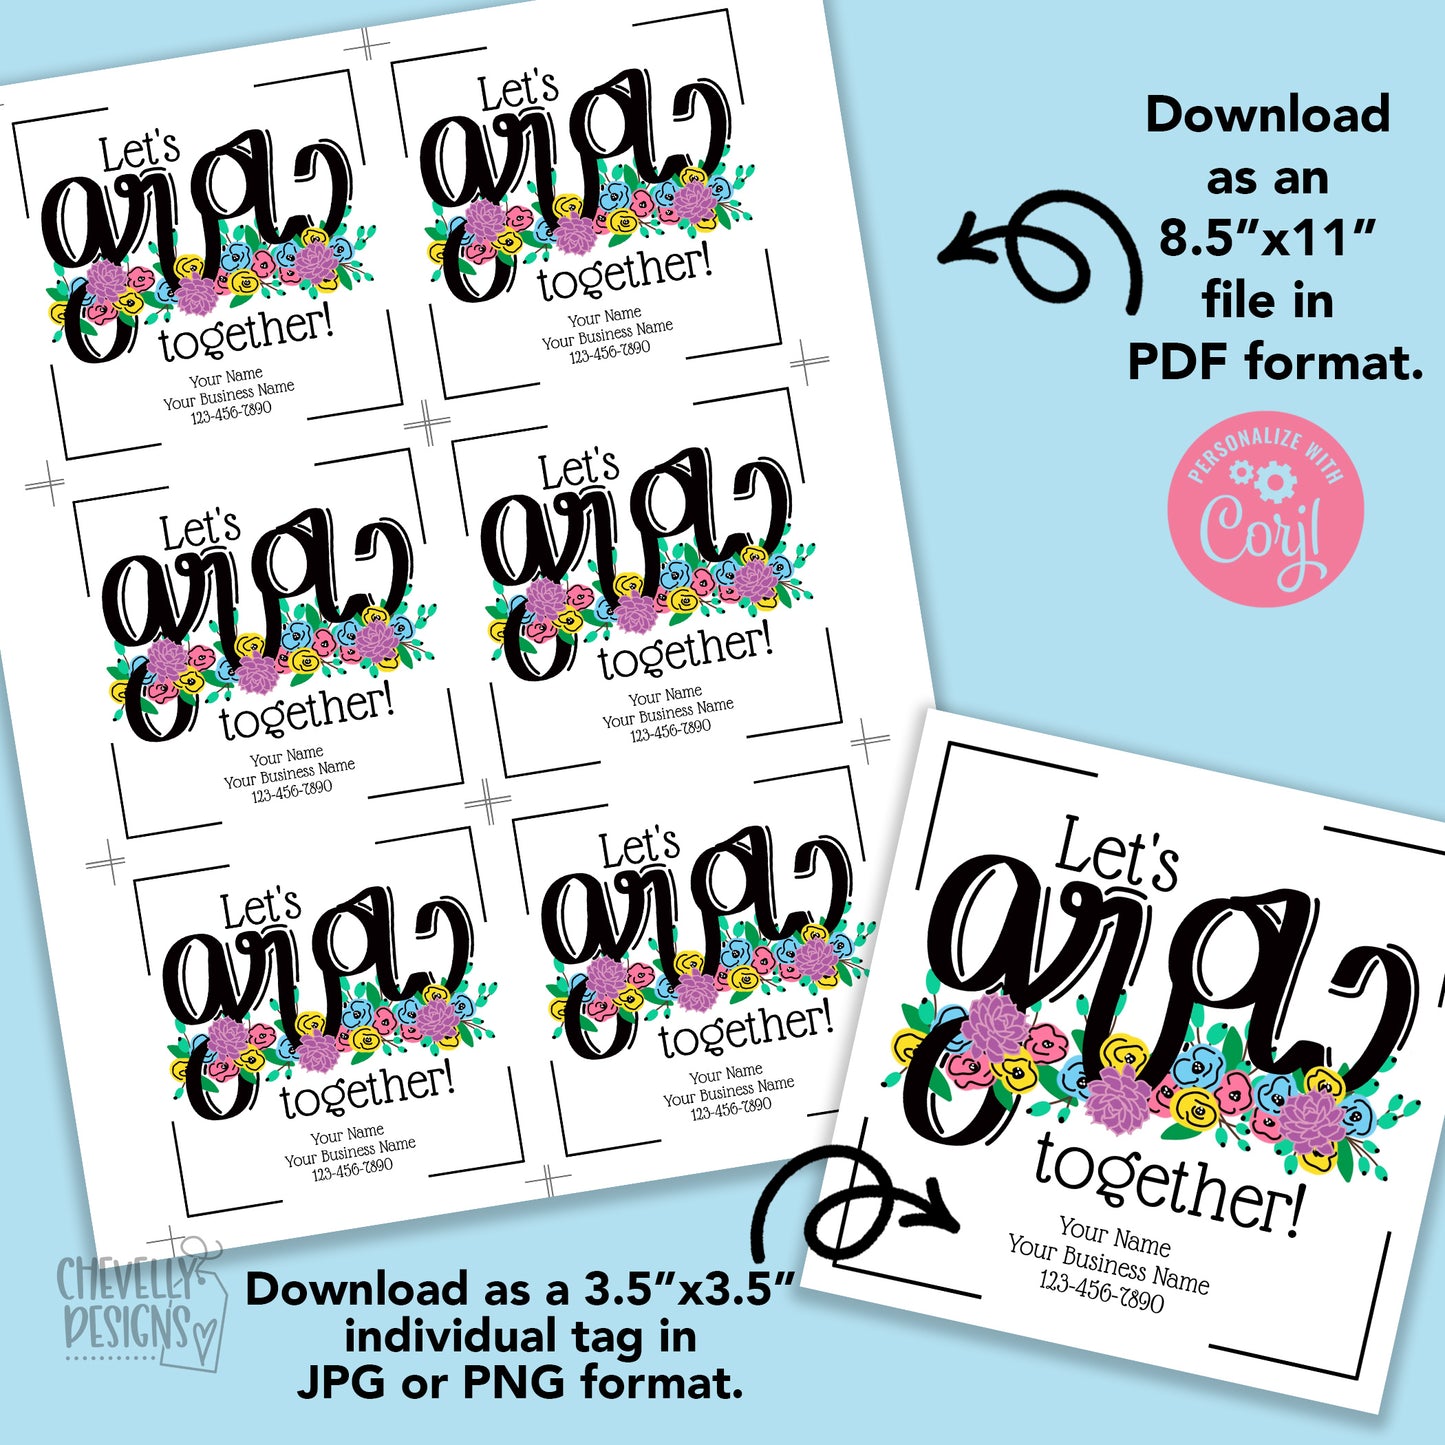 Editable - Let's Grow Together - Referral Gift Tags for Business Marketing - Printable - Digital File